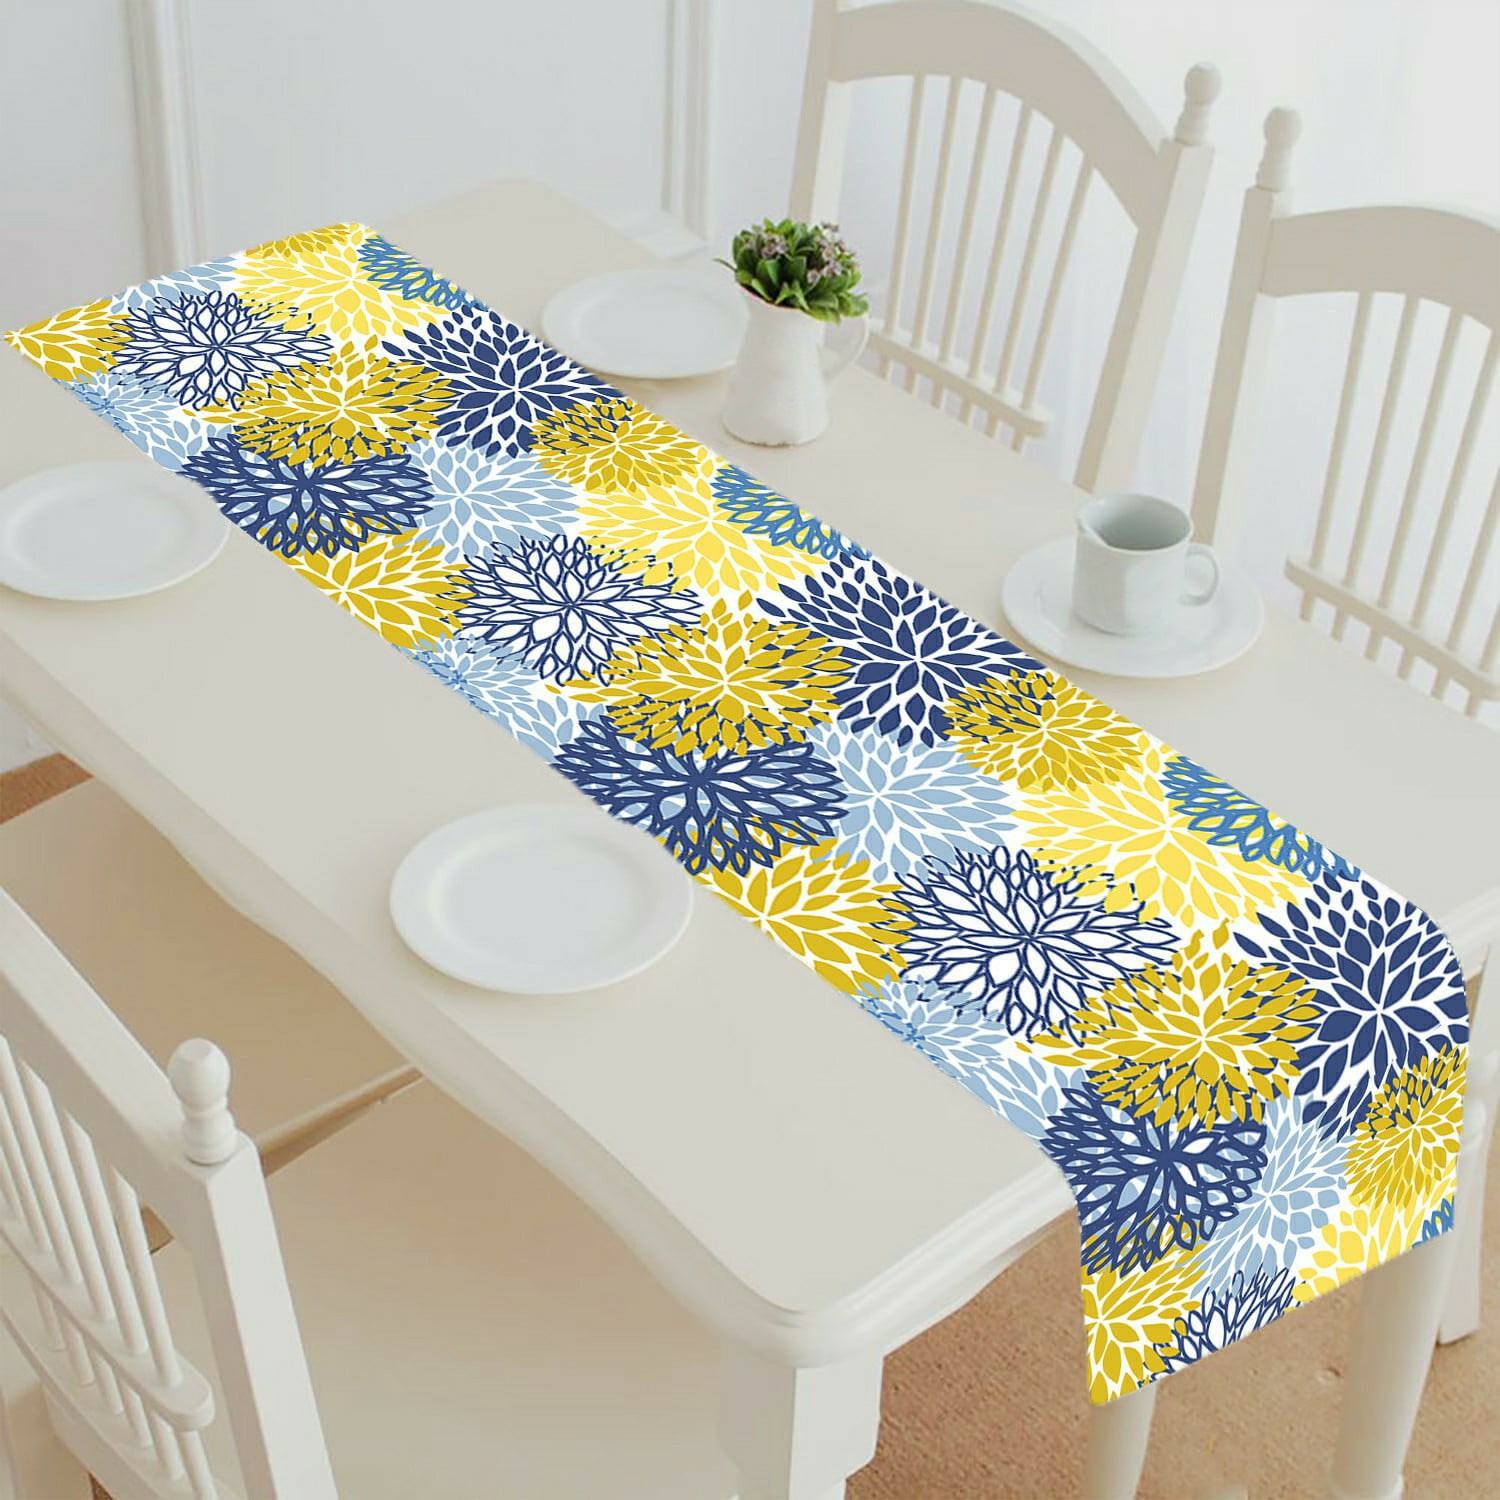 AUUXVA 13x70 inches Long Table Runner African Cartoon Dinosaur Tree Decorative Polyester Table Runners Tablelcoth for Home Coffee Kitchen Dining Table Party Banquet Holiday Decoration 